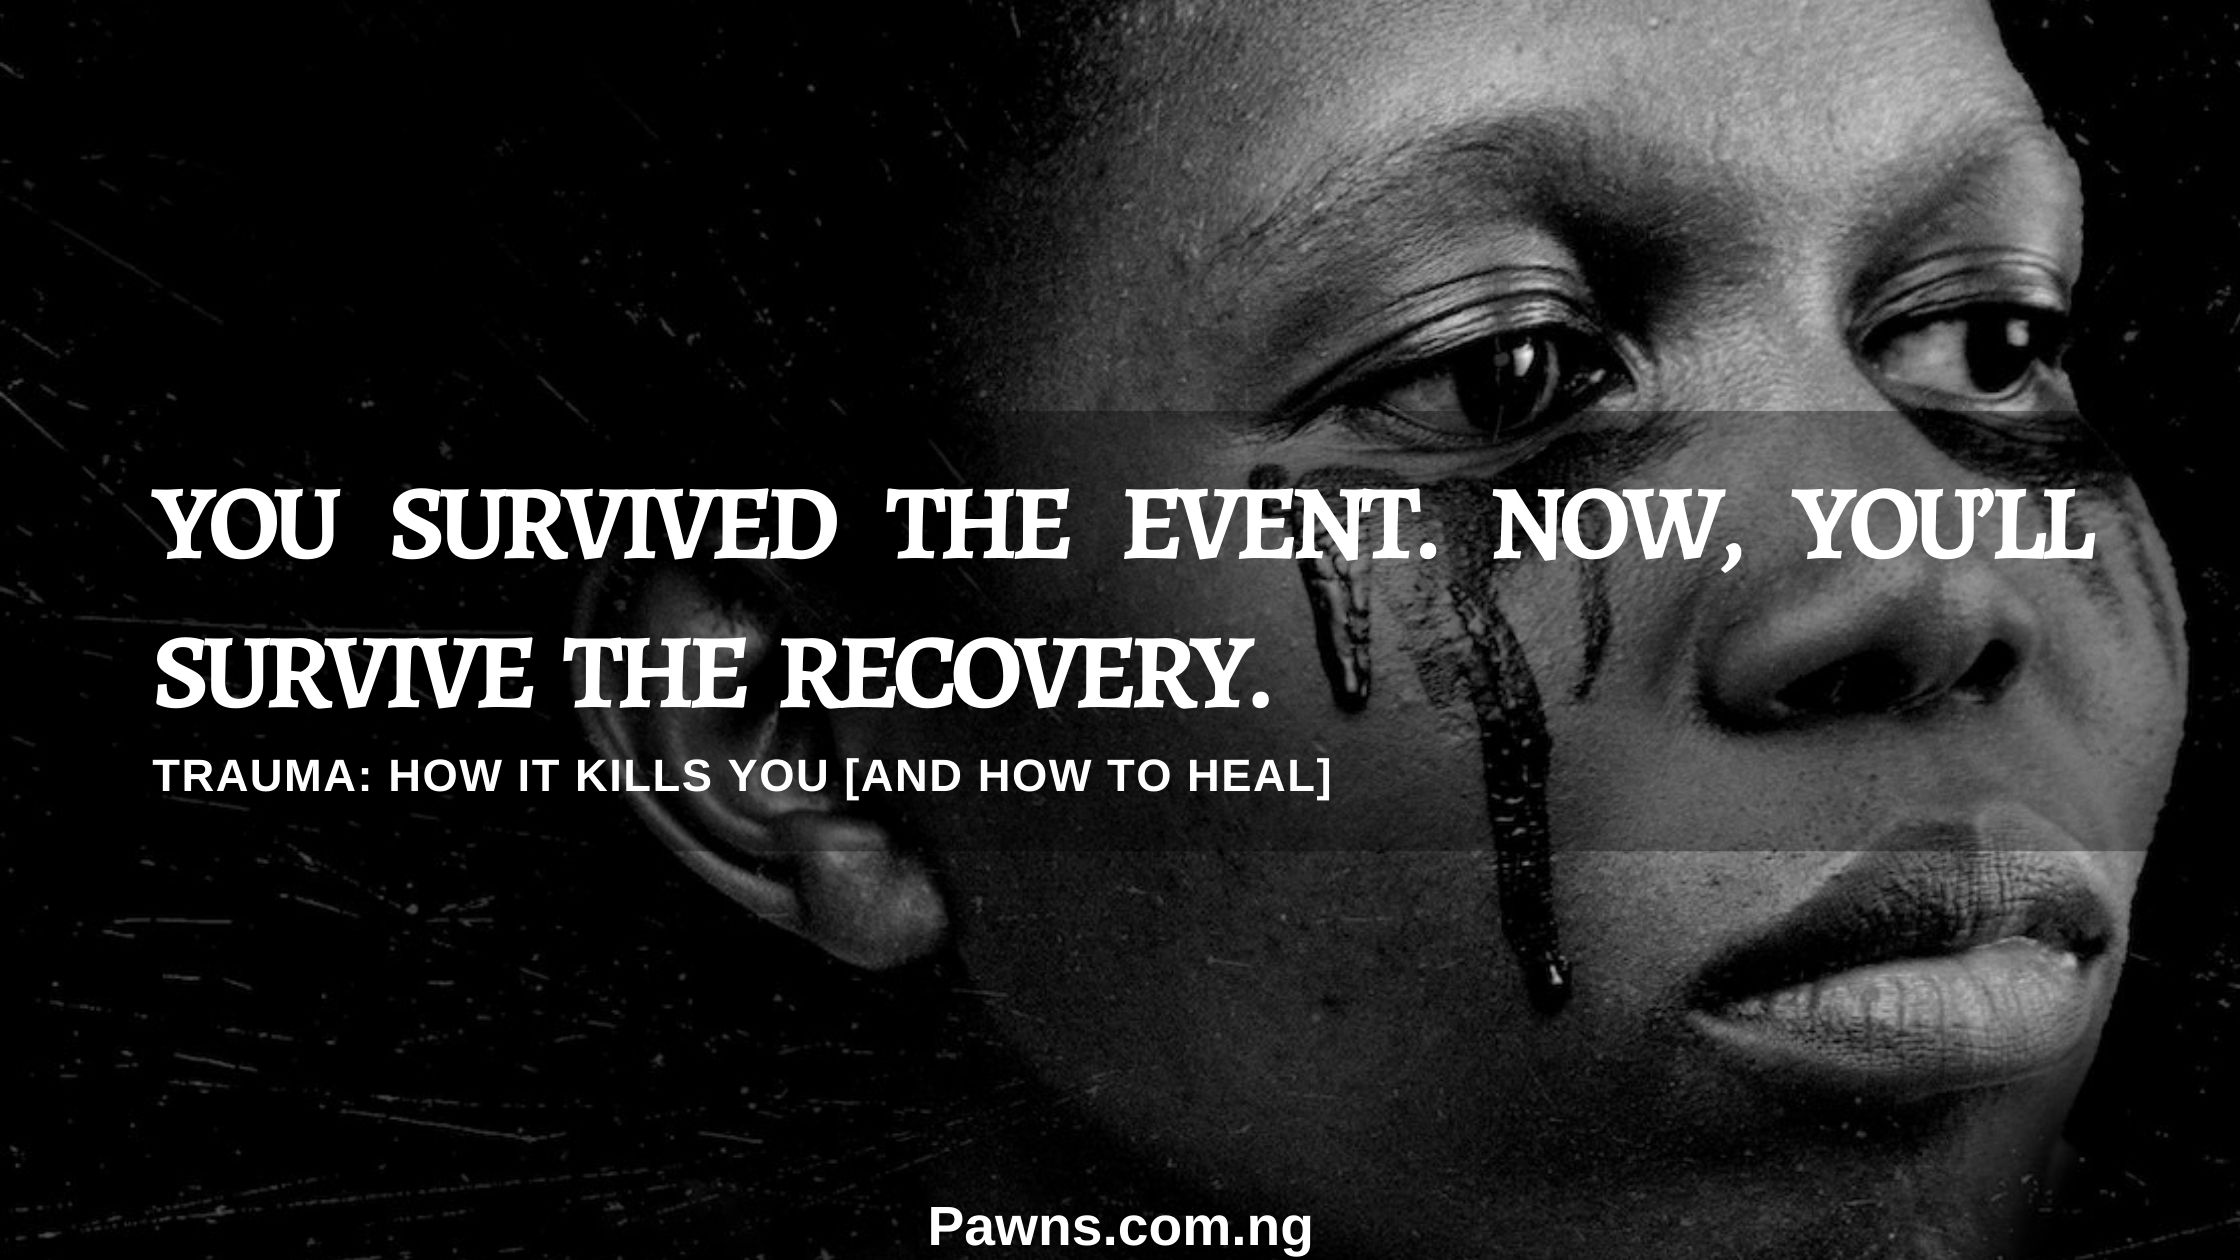 you survived the event, now you'll survive the recovery Trauma how it kills and how to heal